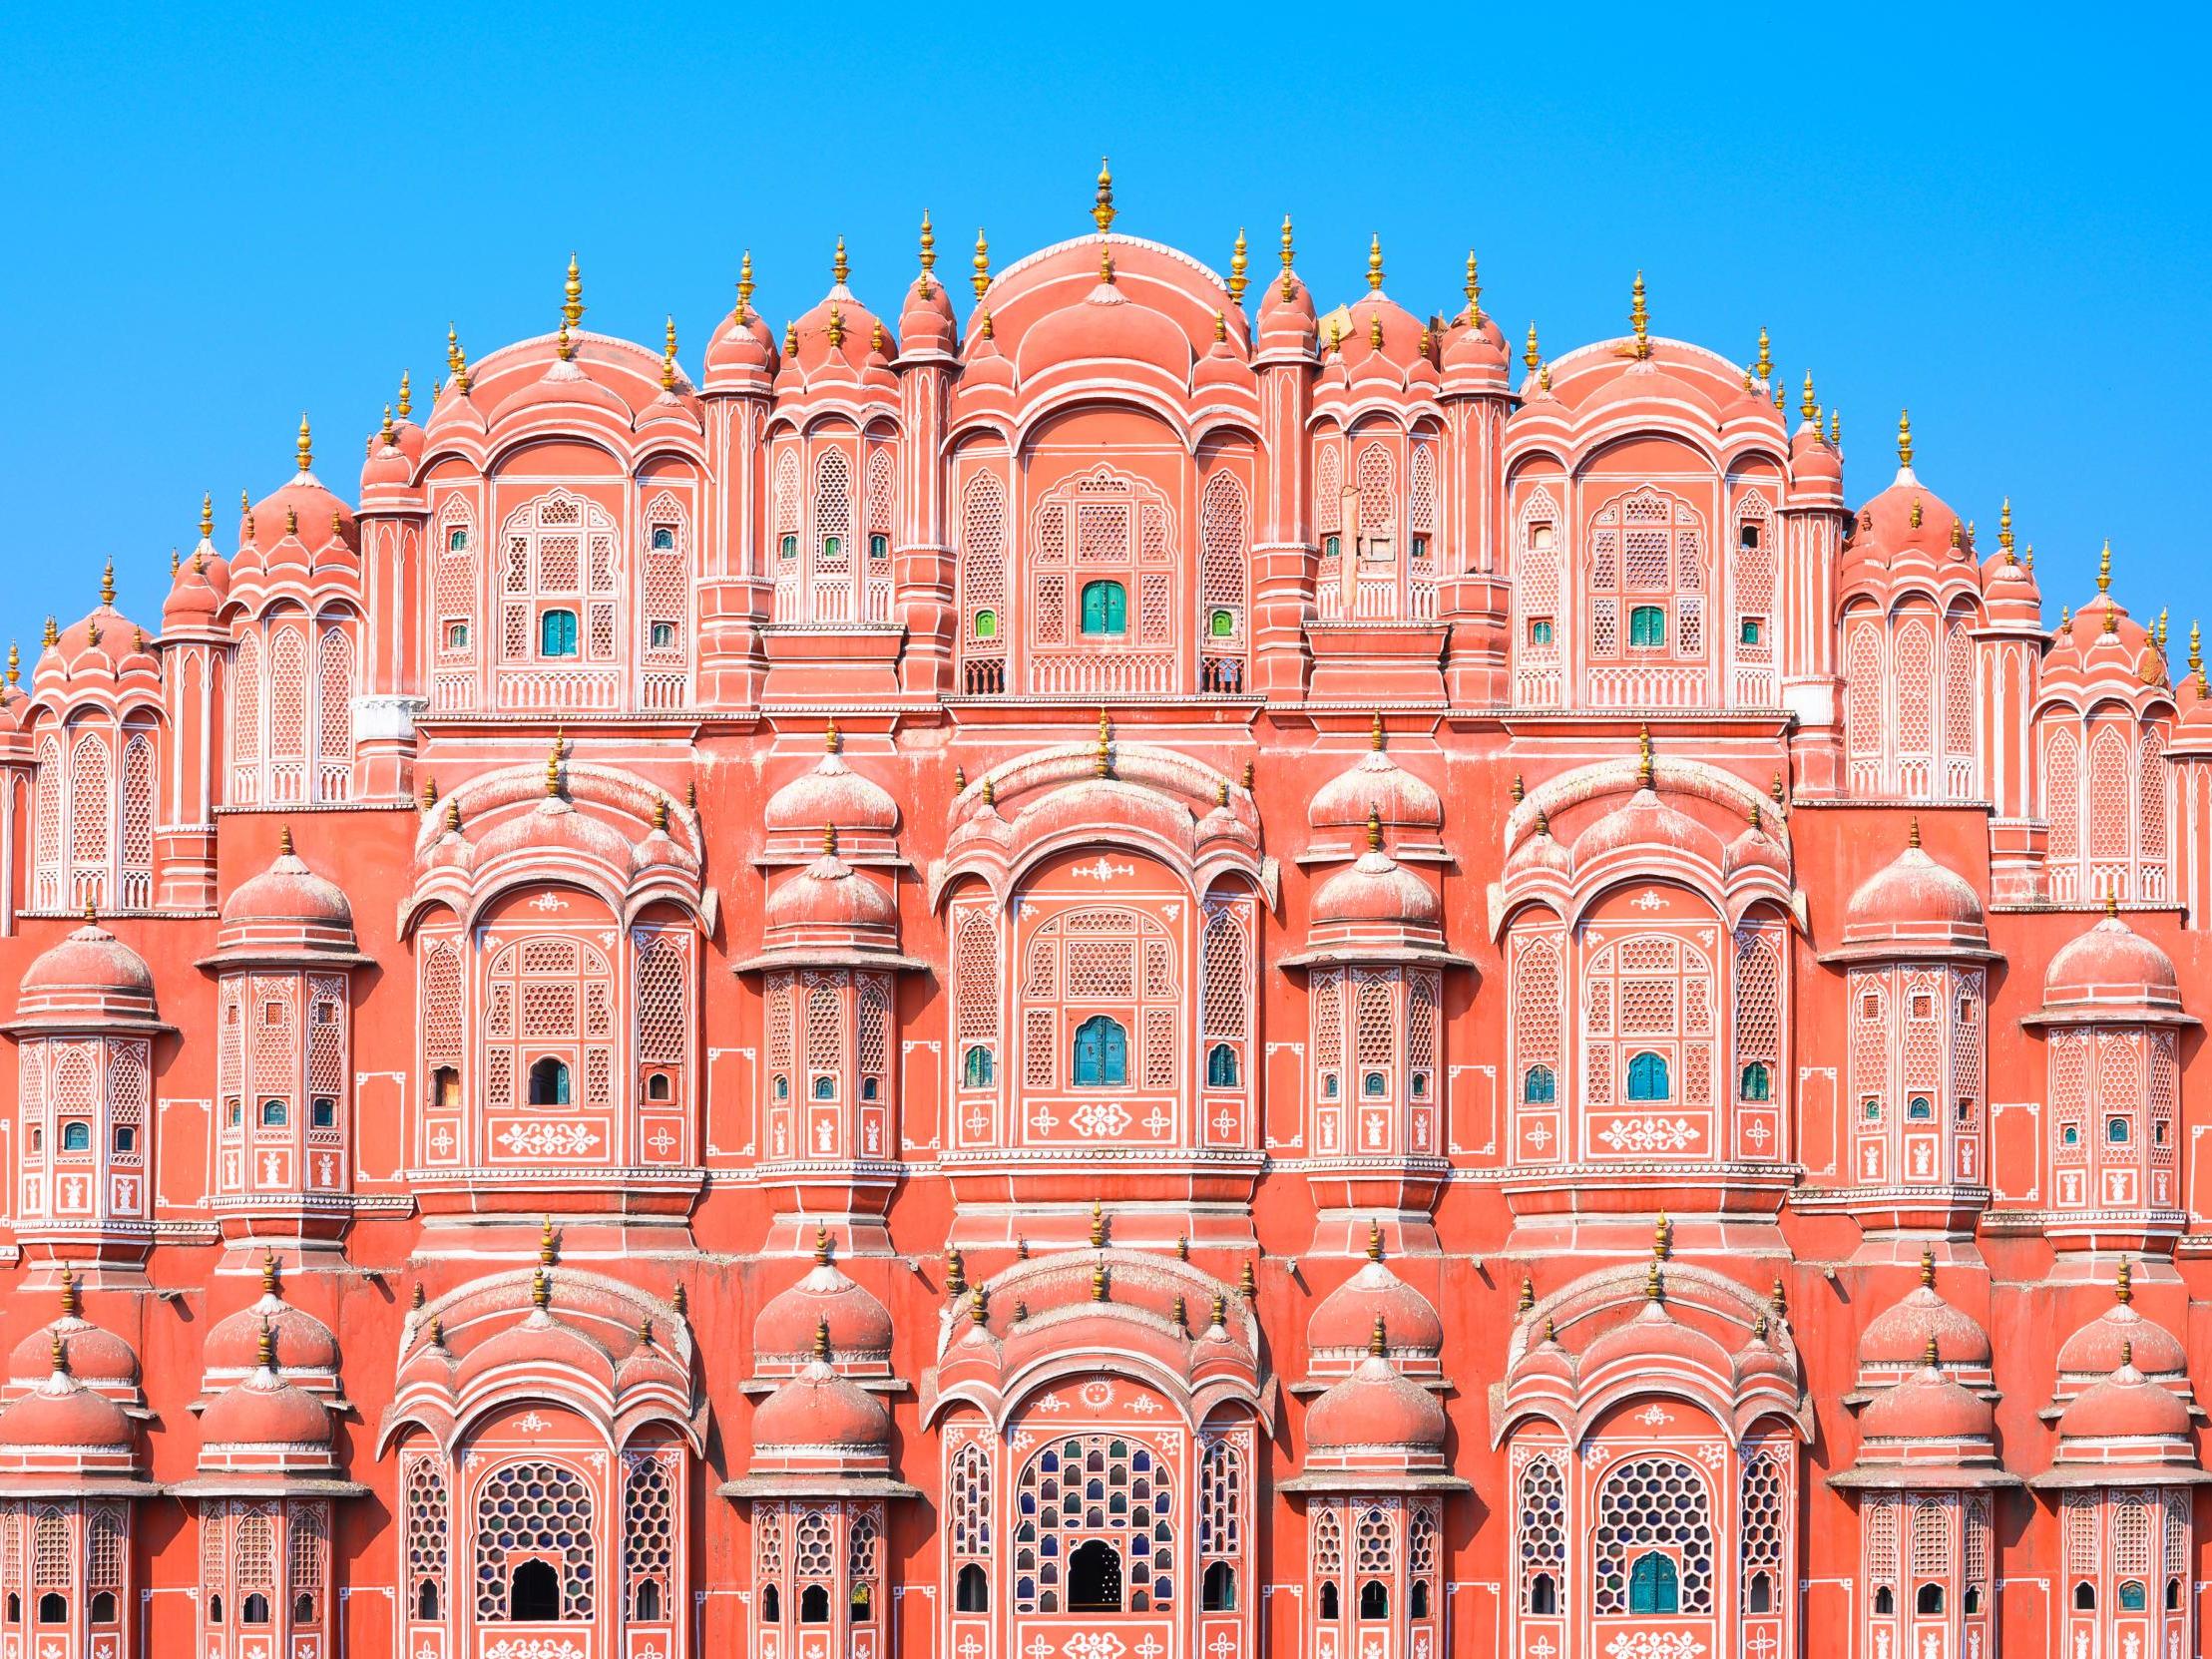 Hawa Mahal or Palace of the Winds in Jaipur, India